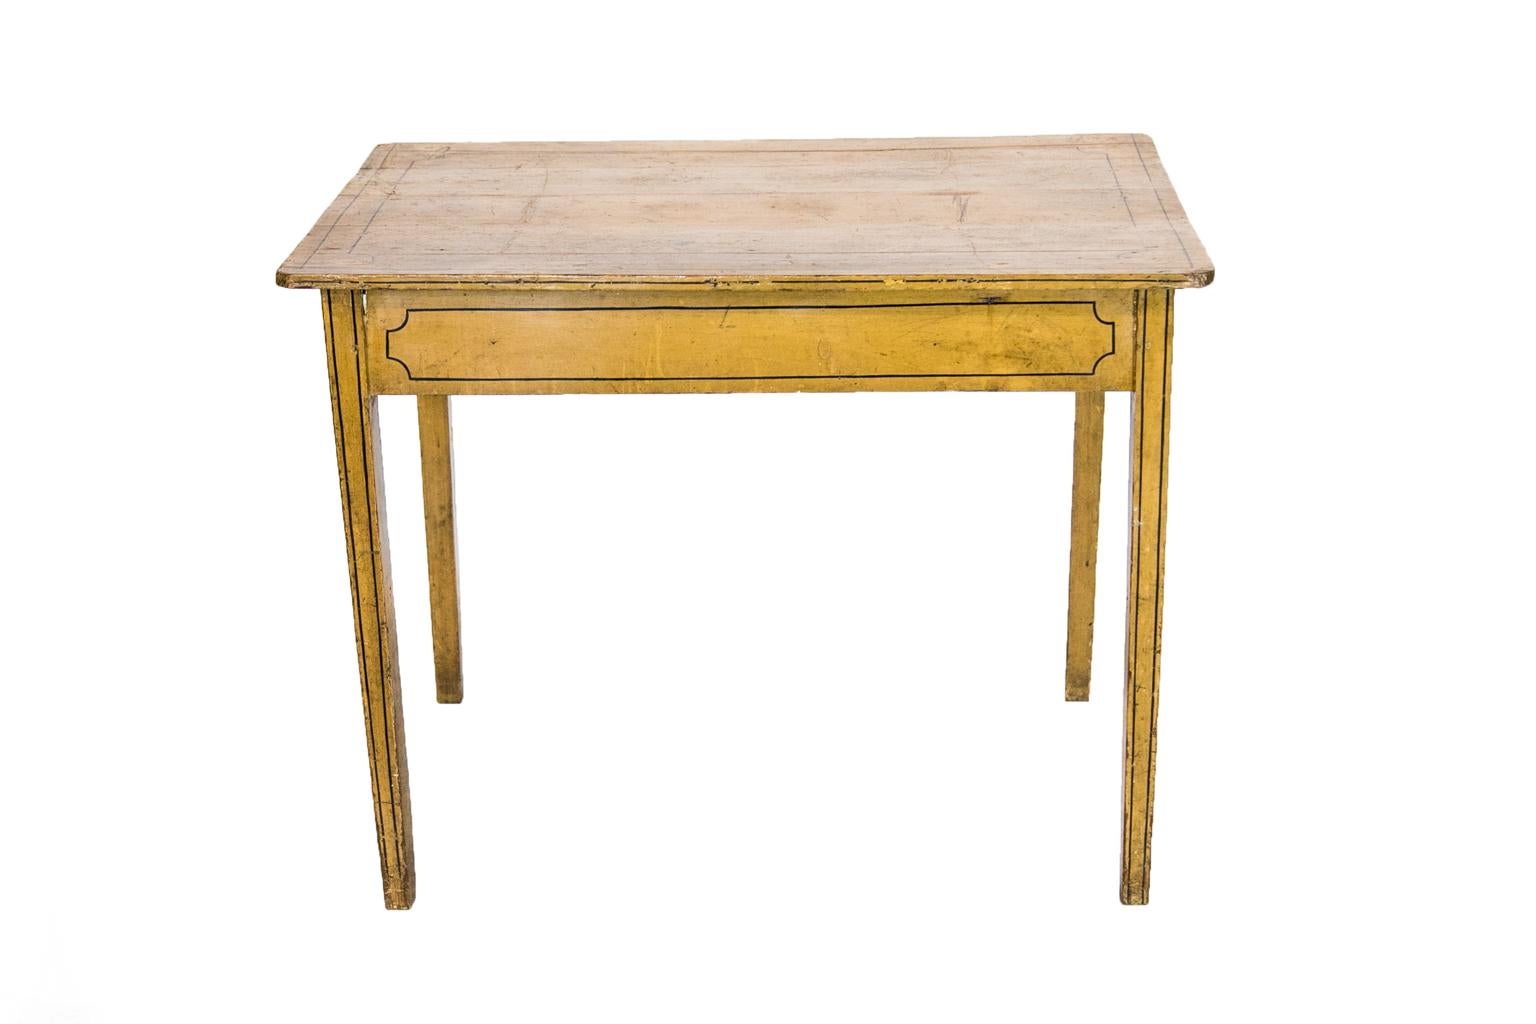 This pine table is faux painted with simulated ebony line inlay on the top and sides.
 